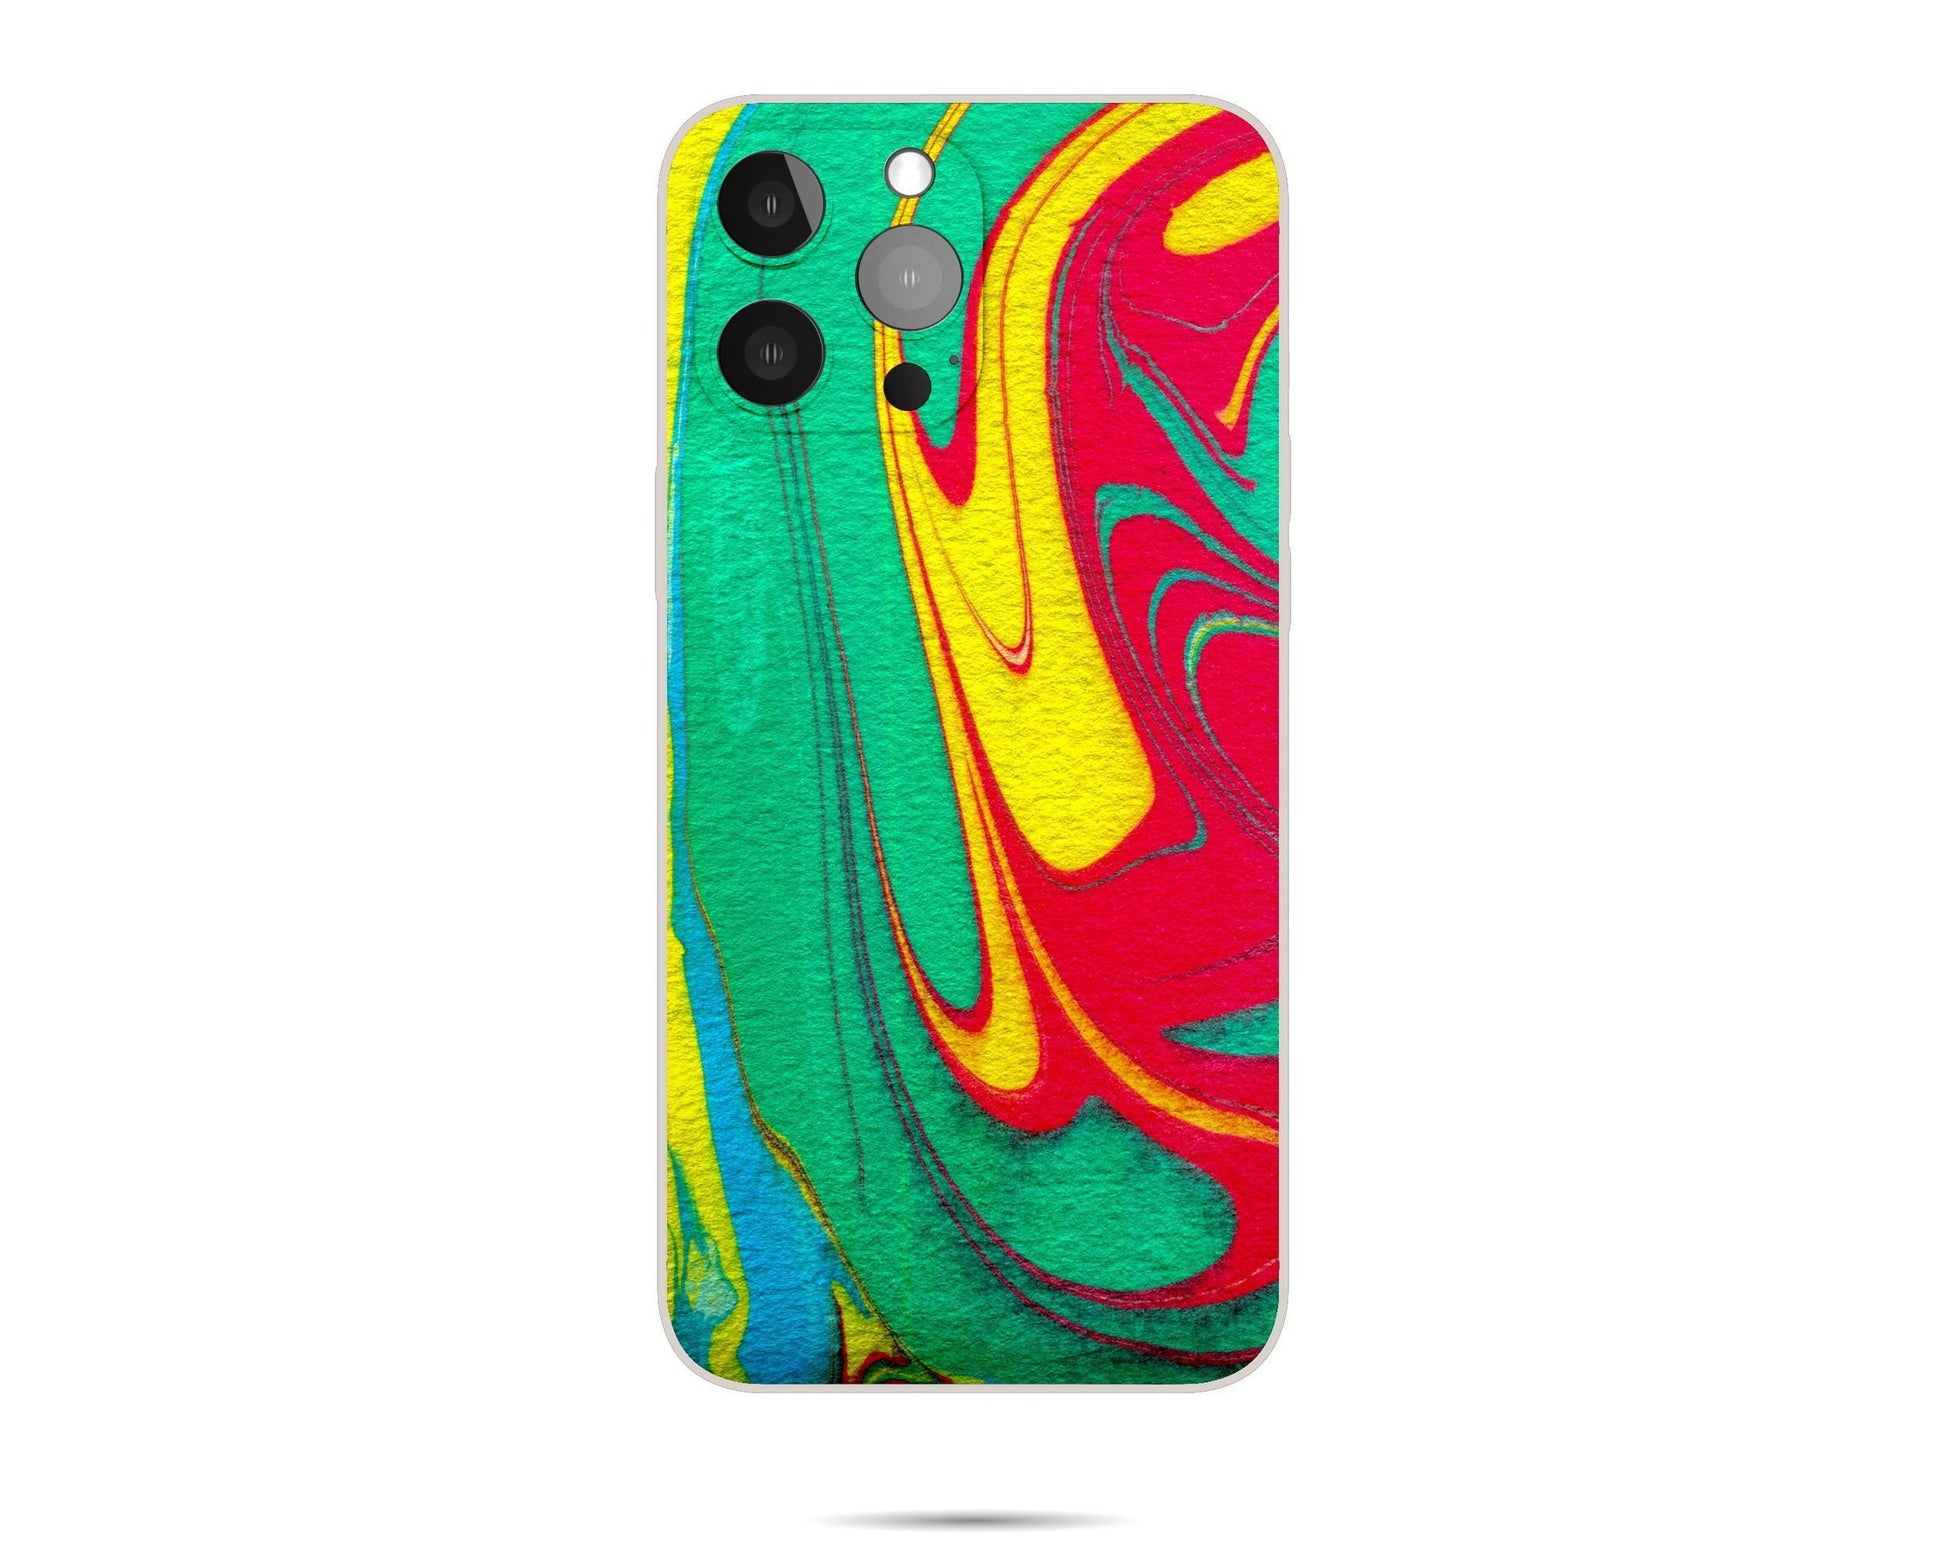 Abstract Art Iphone 14 Pro Max Case, Iphone 12 Pro Case, Iphone Xs Max, Iphone 8 Plus Case Art, Iphone Protective Case, Iphone Case Matte